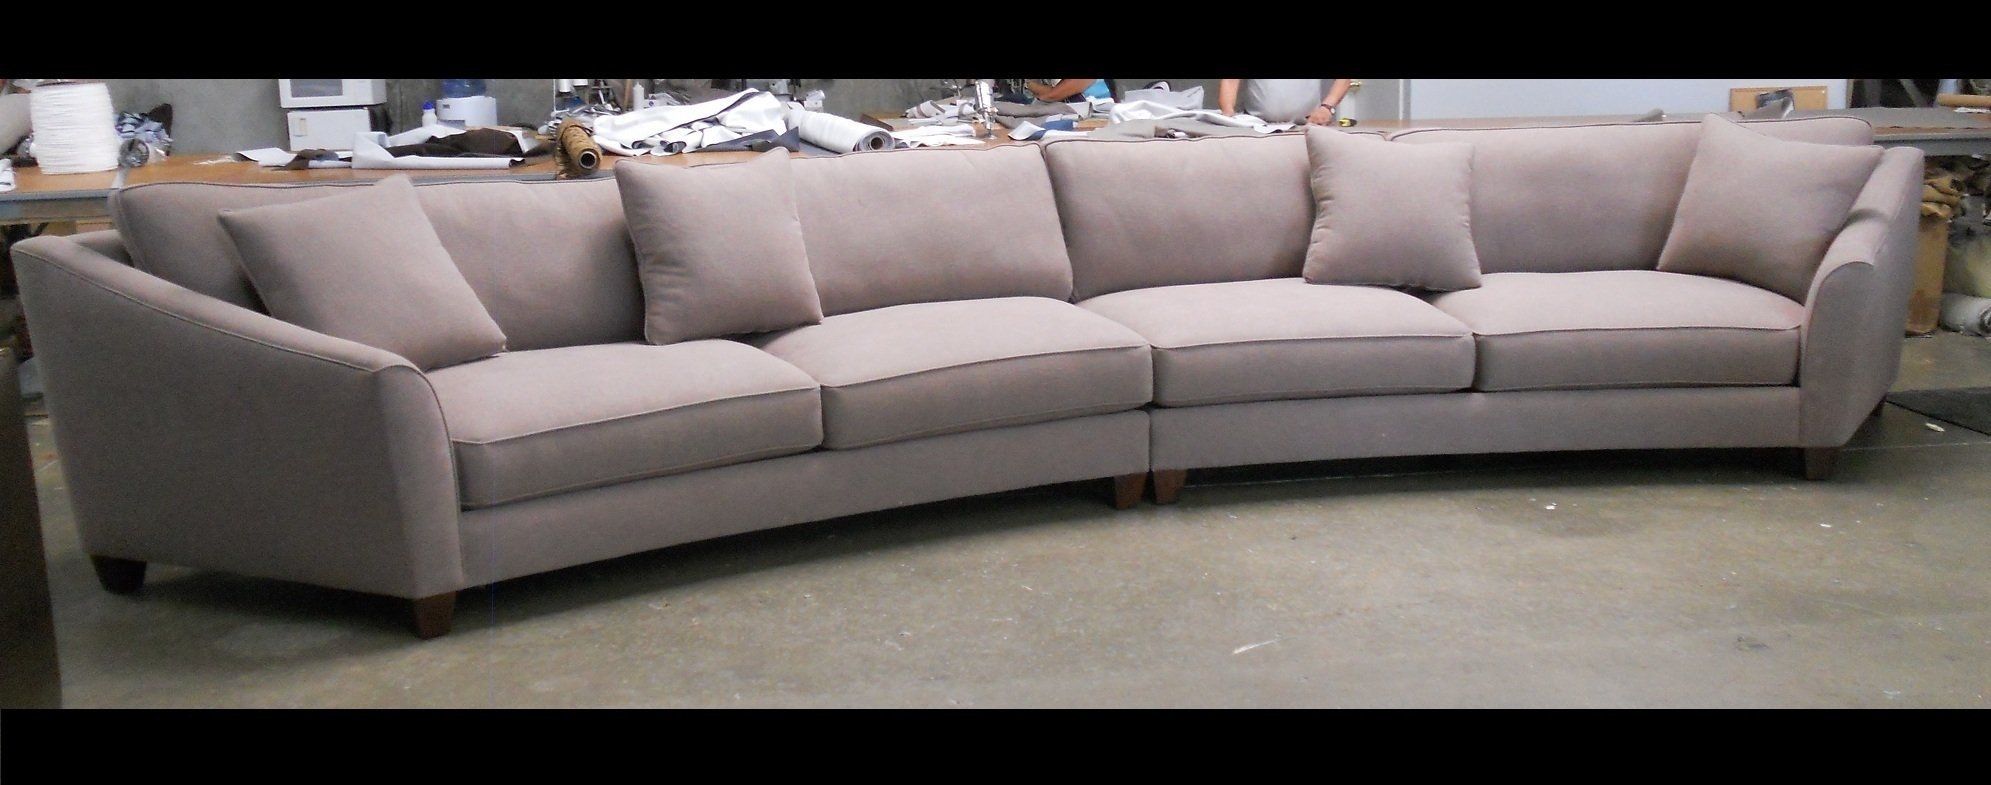 Curved Sectional Sofa Set Rich Comfortable Upholstered Fabric Intended For Contemporary Curved Sofas (View 7 of 12)